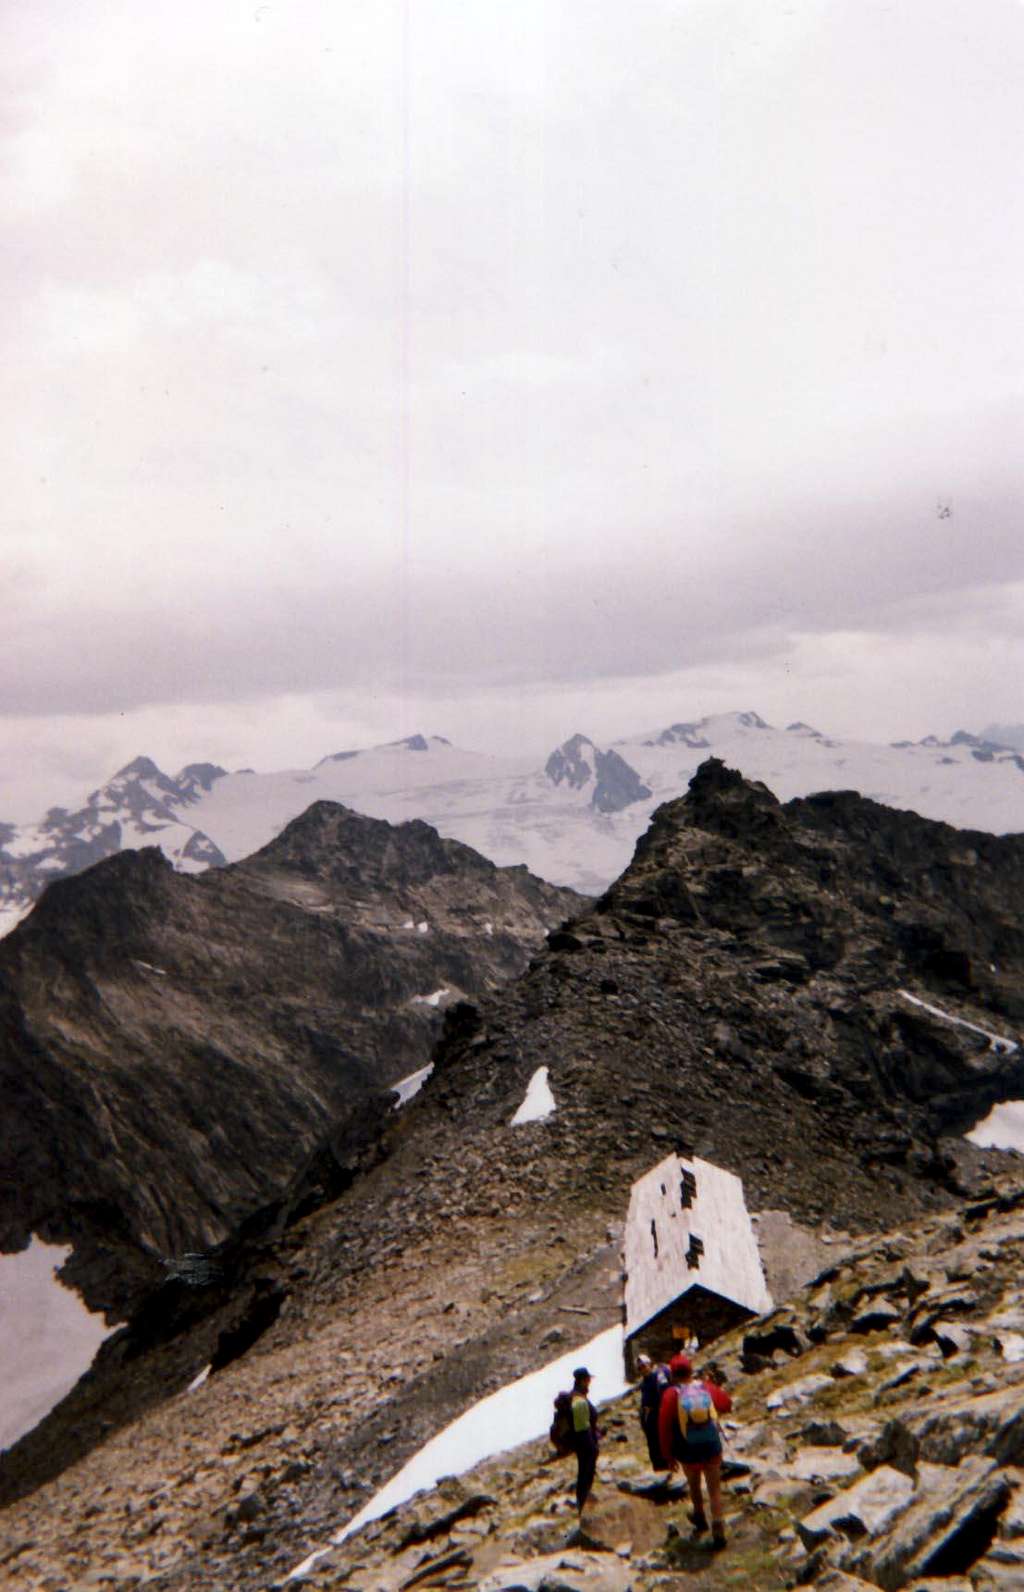 M. COLMET descent from North to South Summit 1993